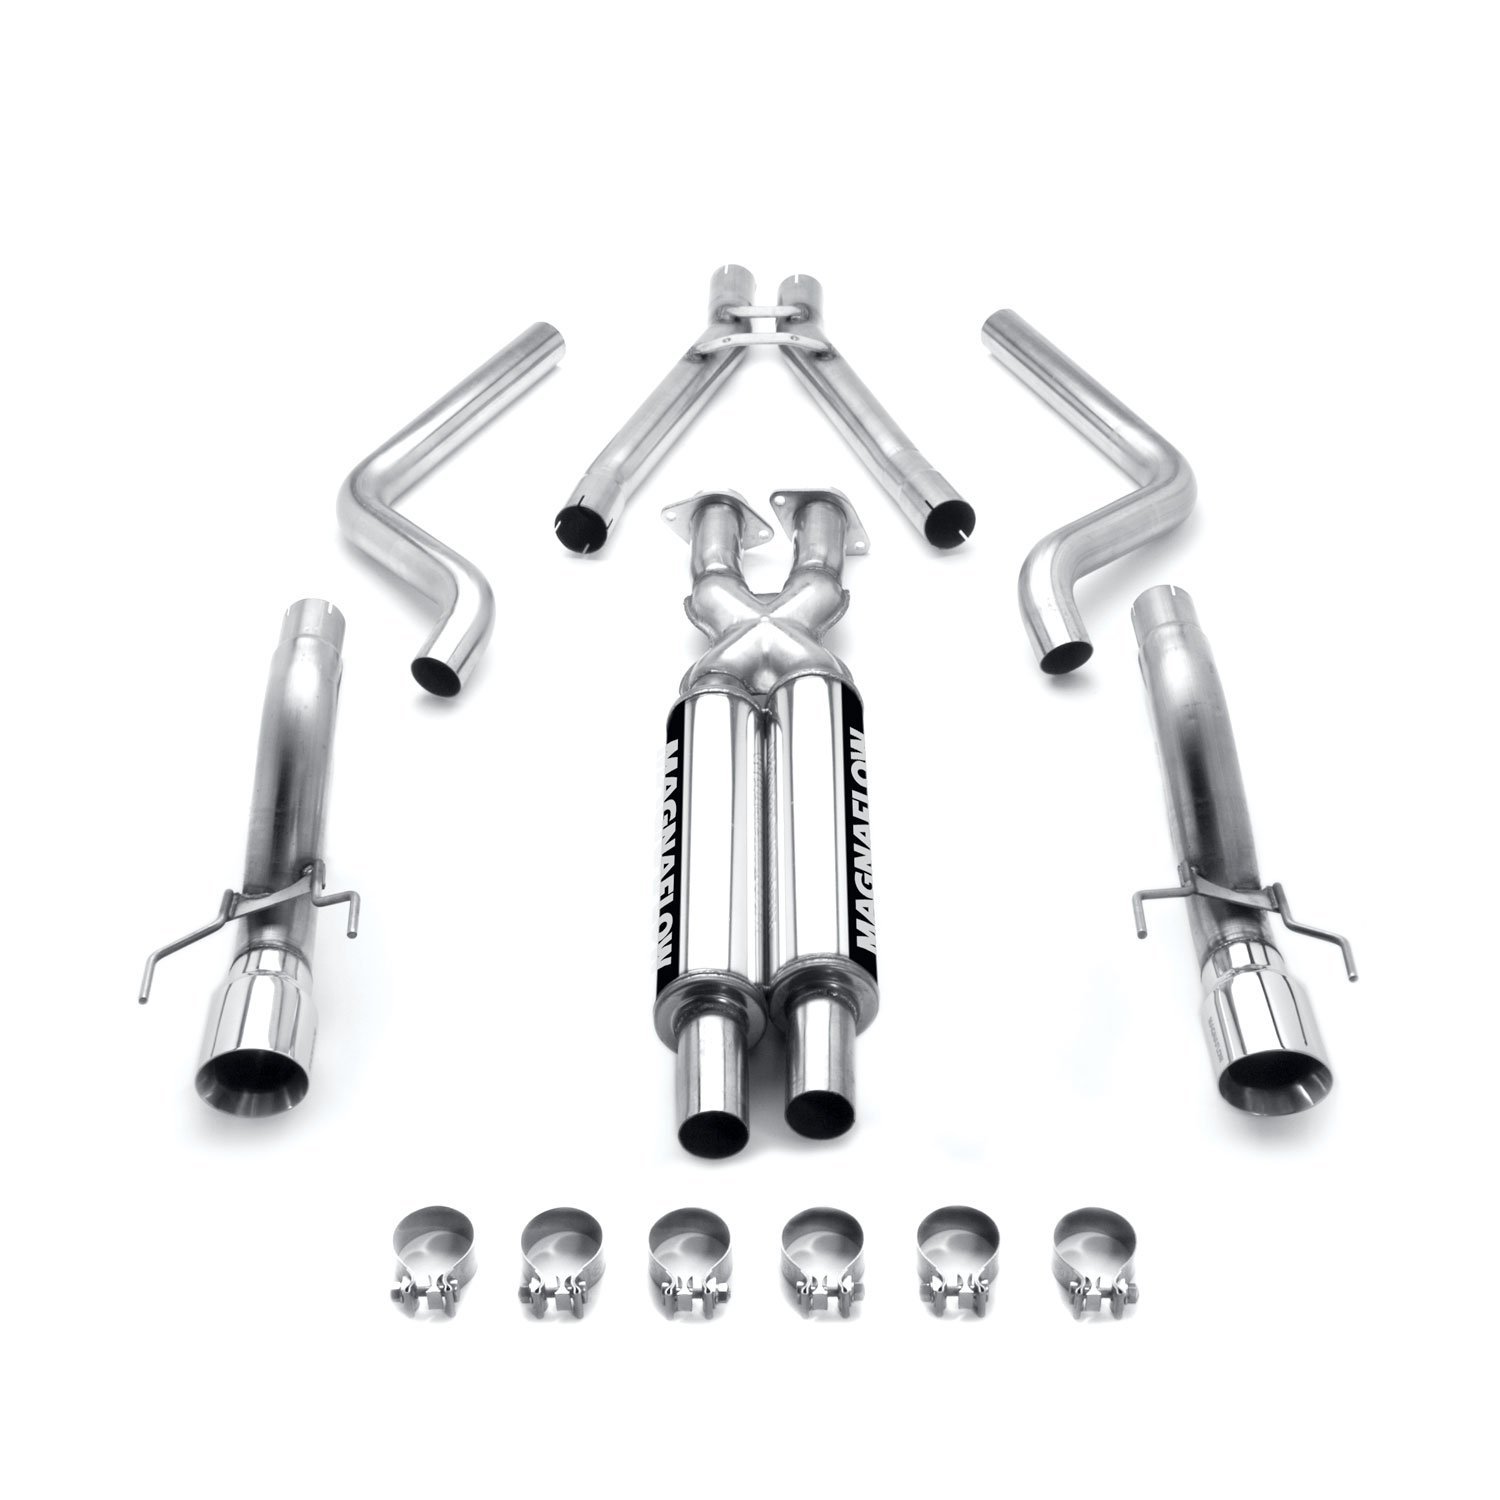 Magnaflow C6 Corvette Stainless Steel 2.5" Dual Cat-Back Exhaust System